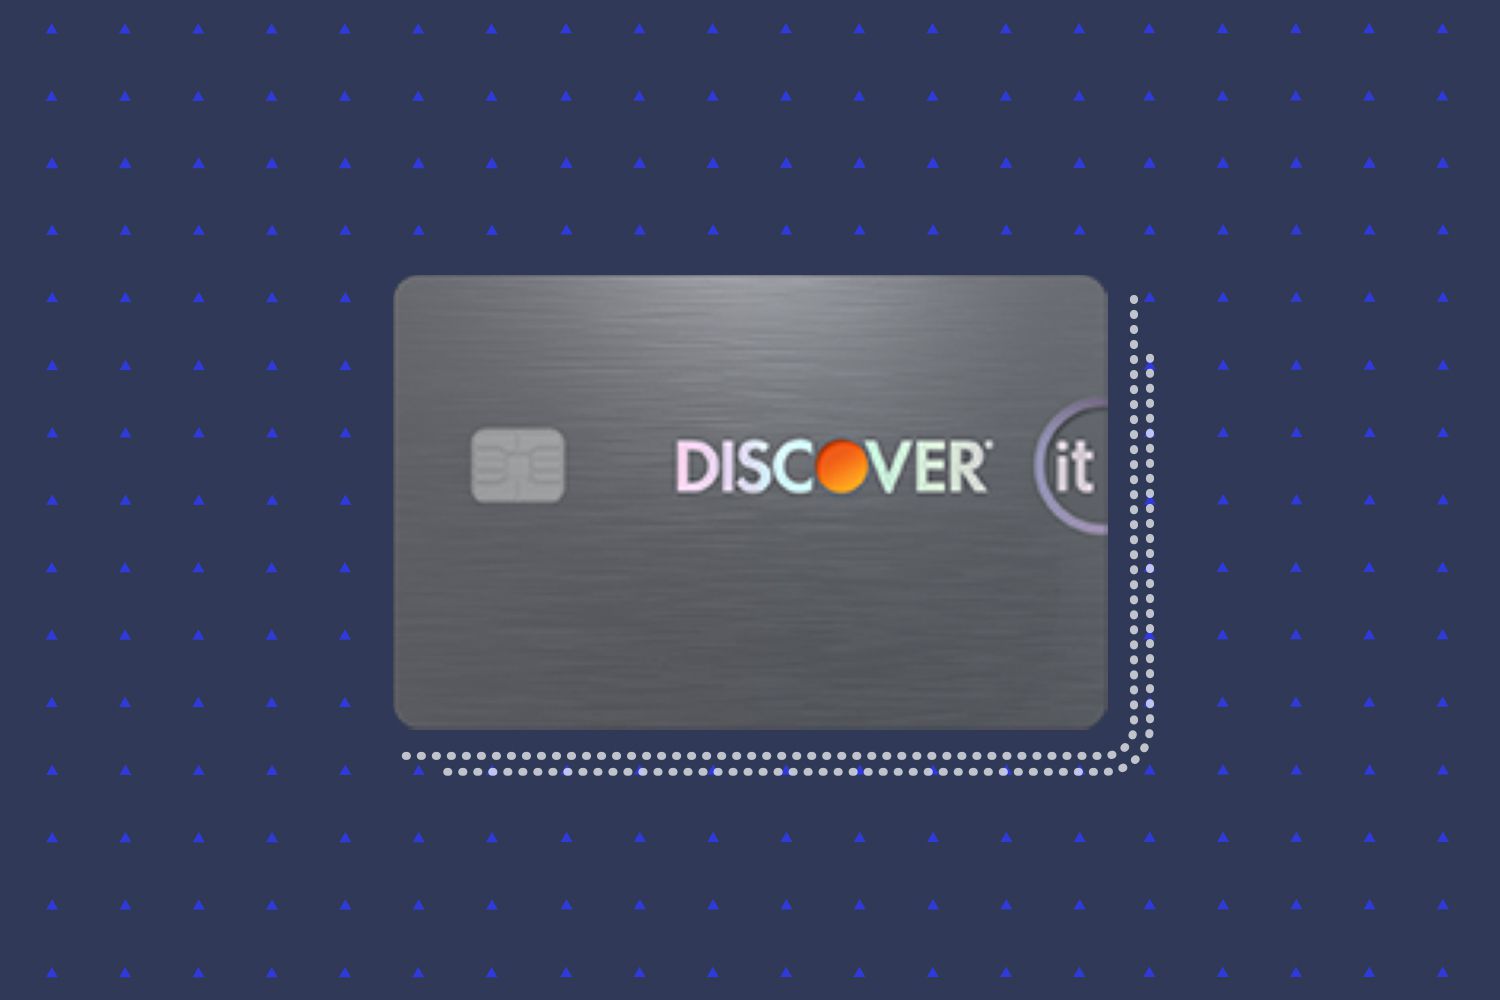 What Are The Benefits Of The Discover Secured Card?